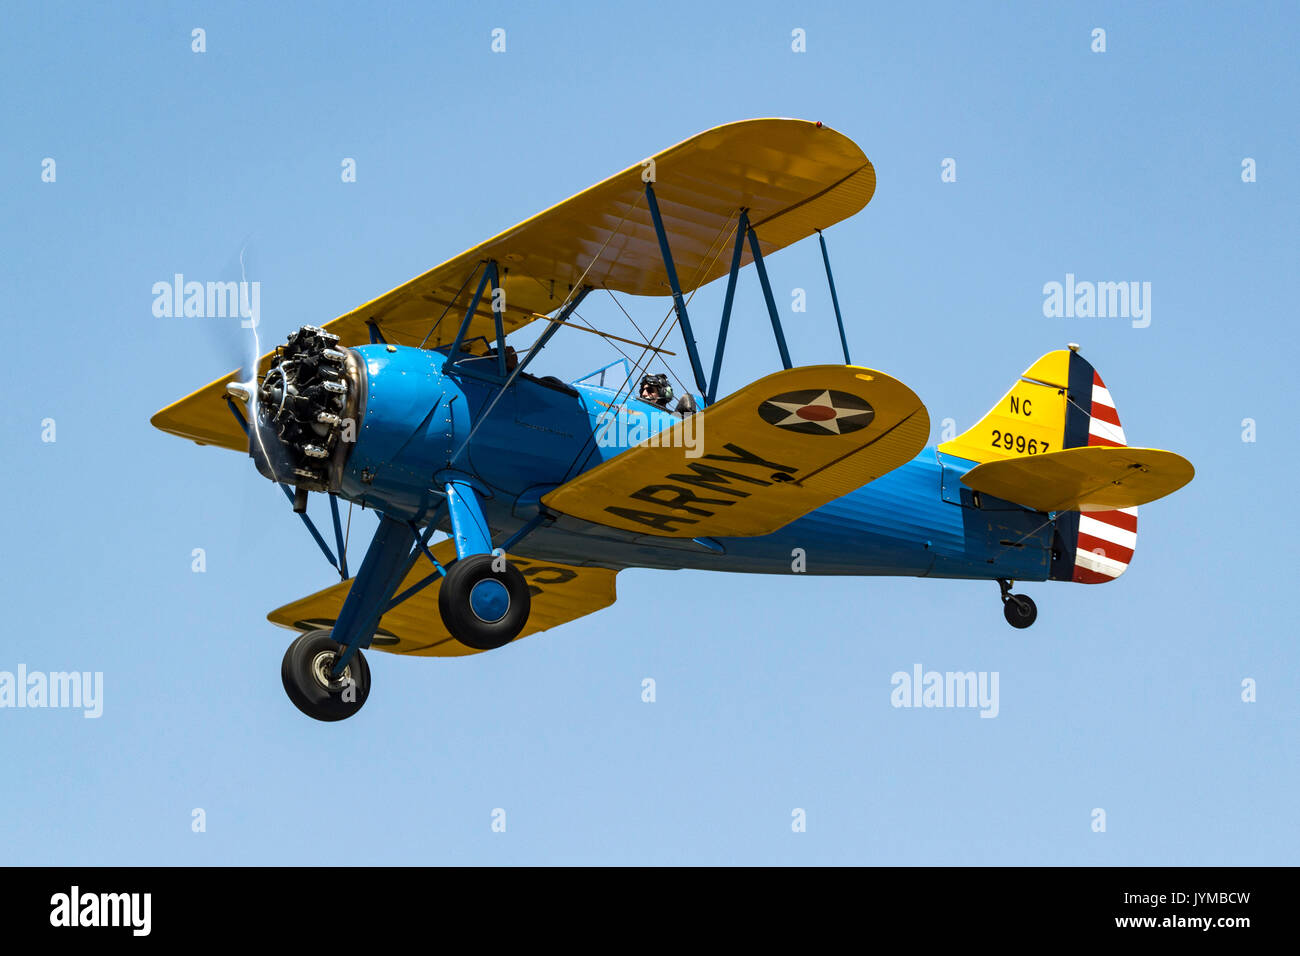 1940 Waco UPF-7 biplane in U.S Army markings in flight during the 2017 Nevada County Airfest Stock Photo